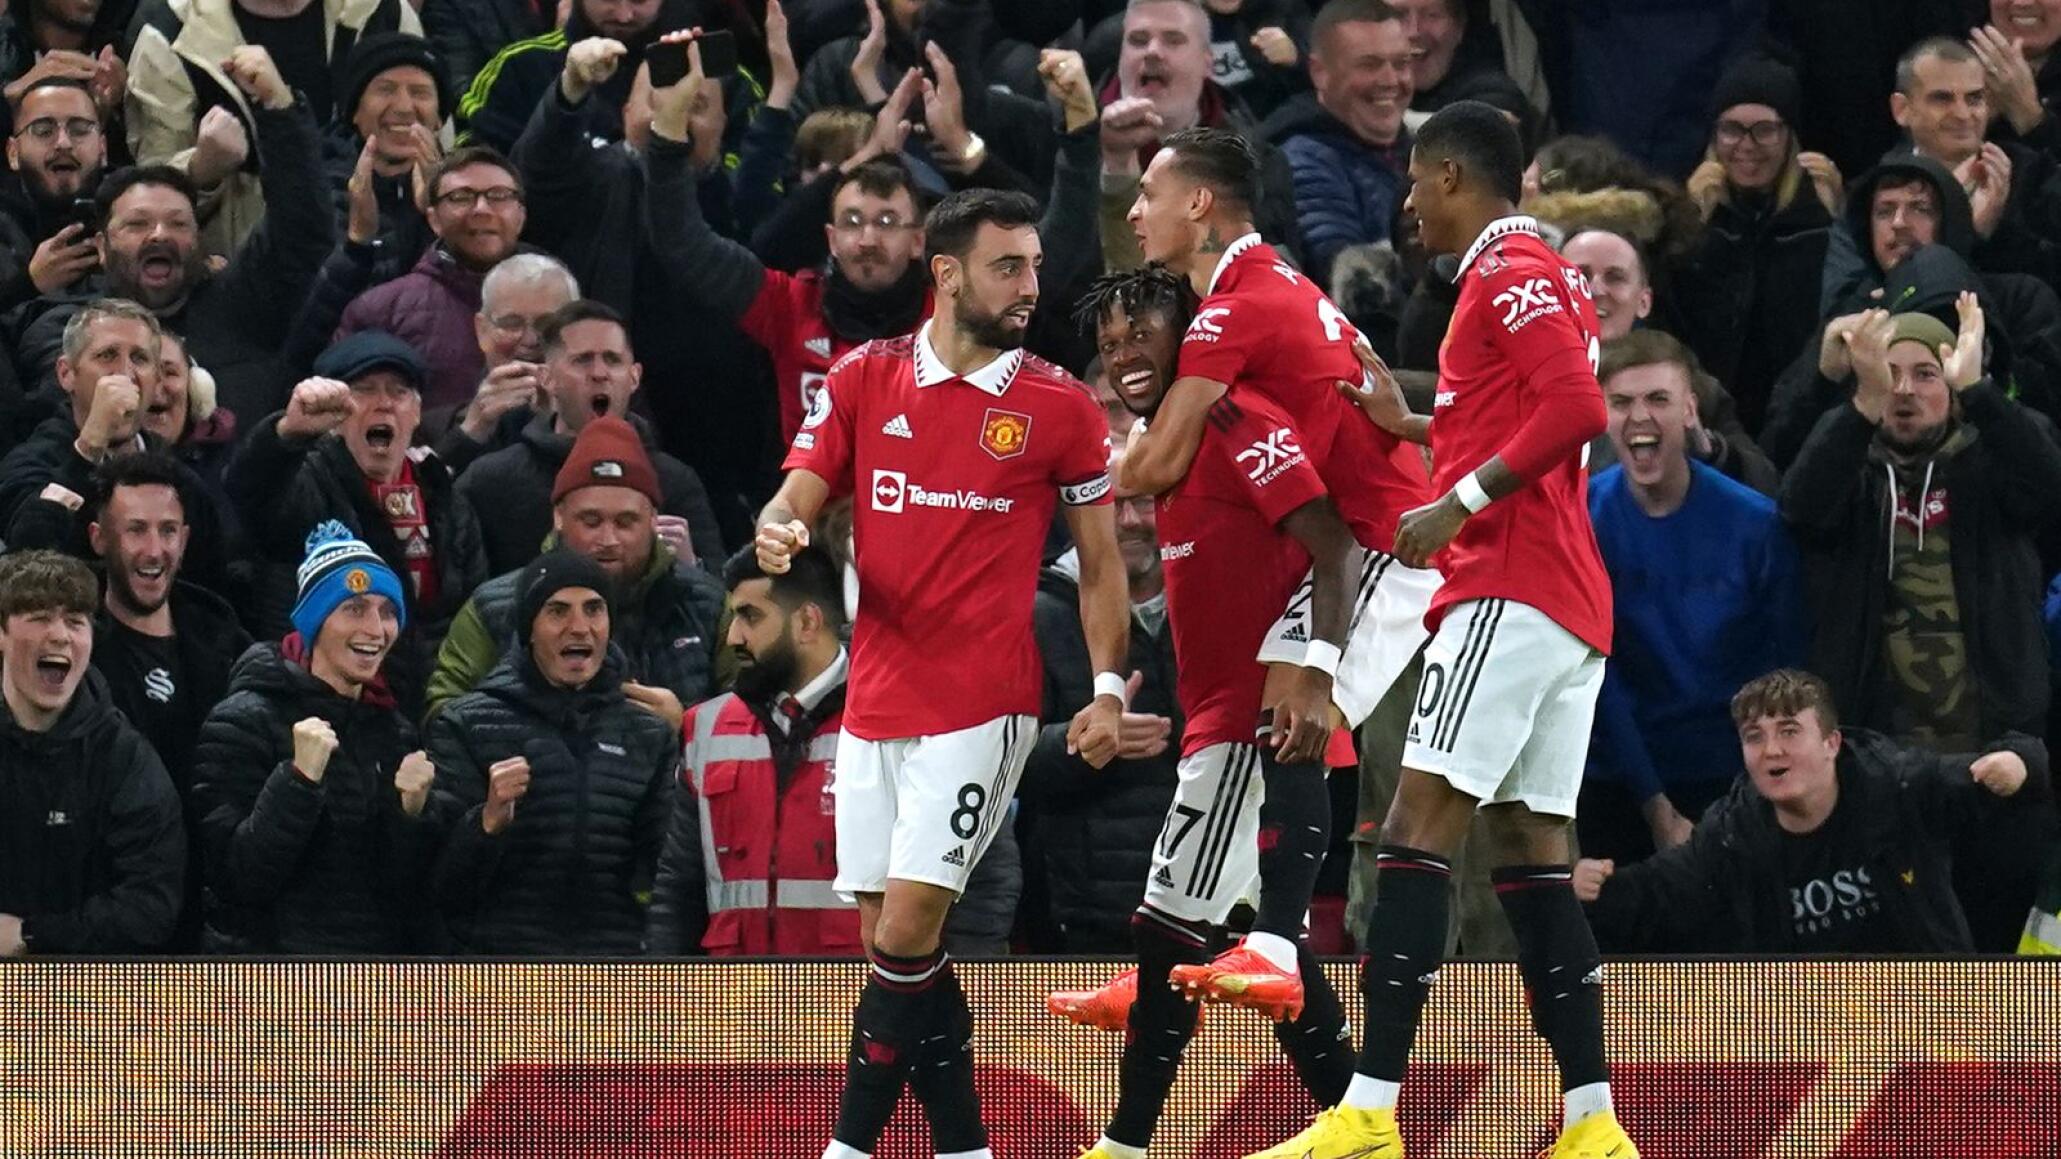 Manchester United soccer player celebrate after scoring a goal